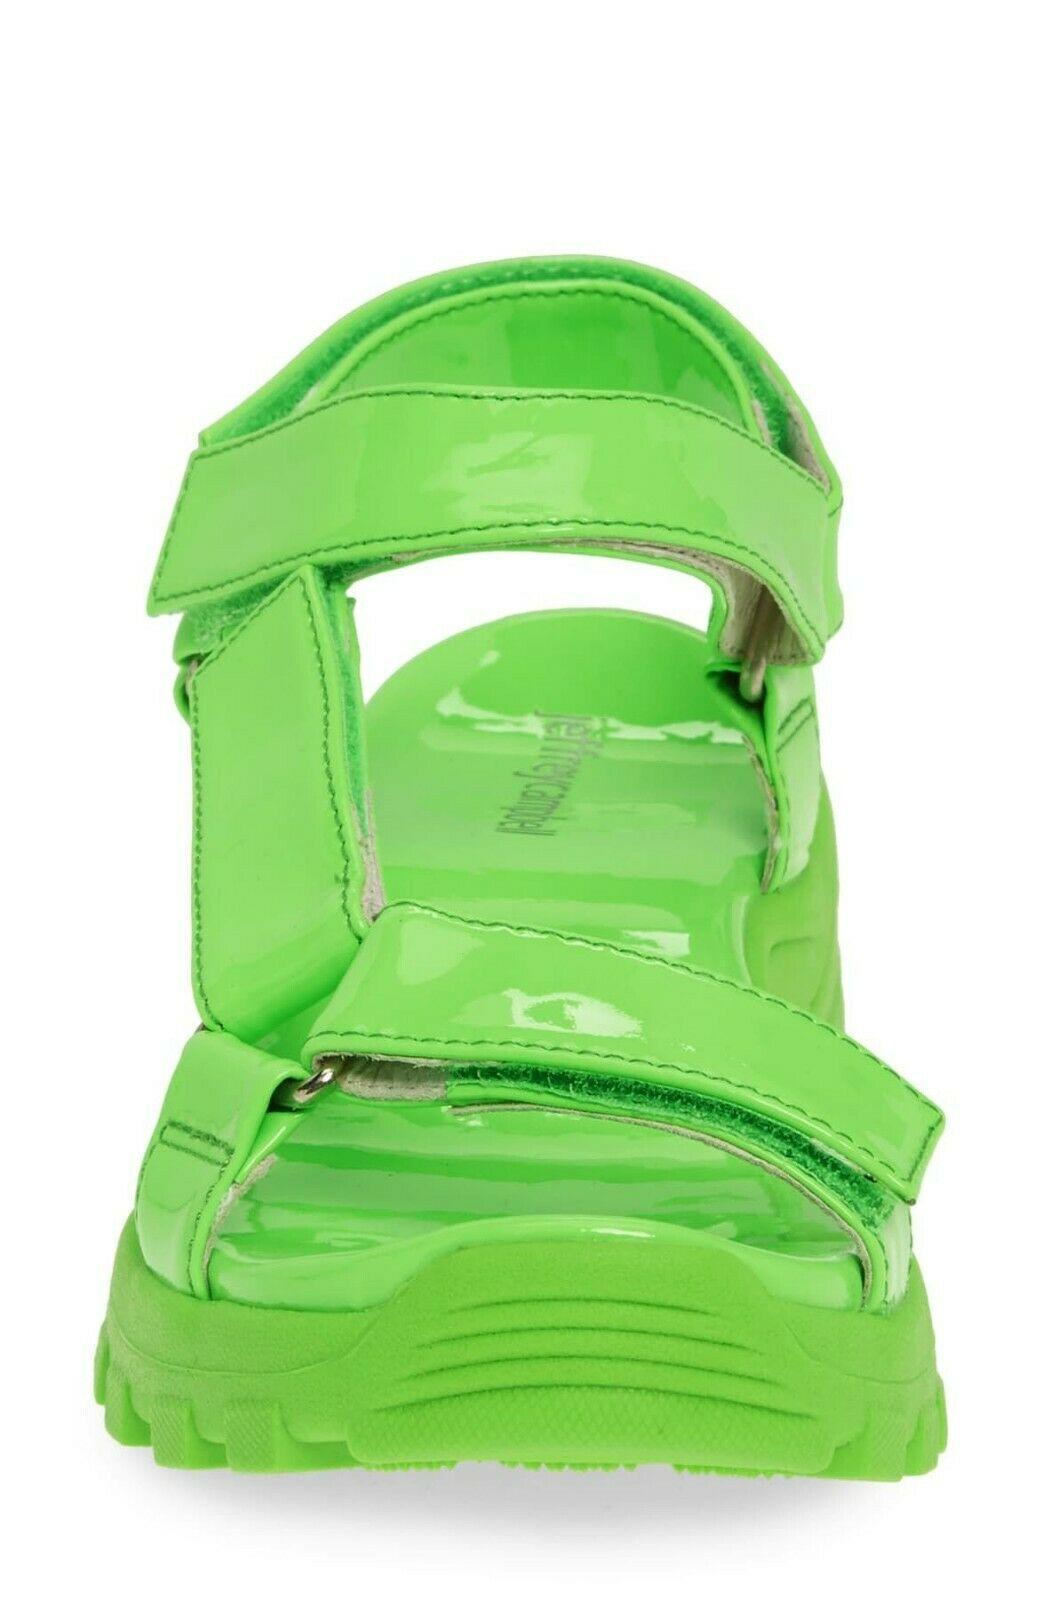 Jeffrey Campbell Patio Womens Leather Sport Sandals Green Size US 7.5 - SVNYFancy